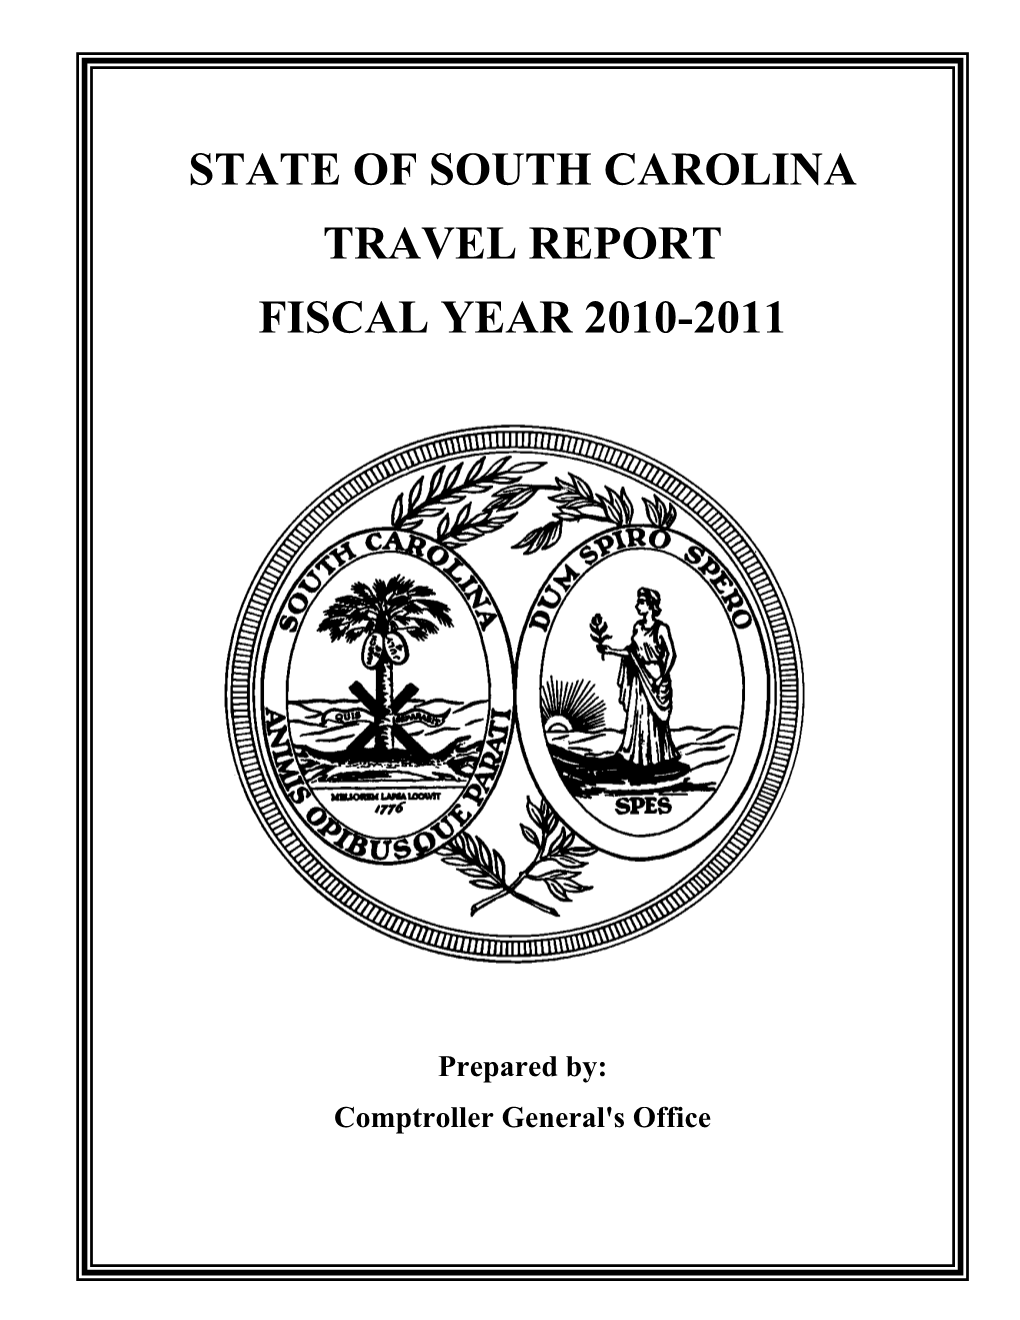 State of South Carolina Travel Report Fiscal Year 2010-2011 Table of Contents